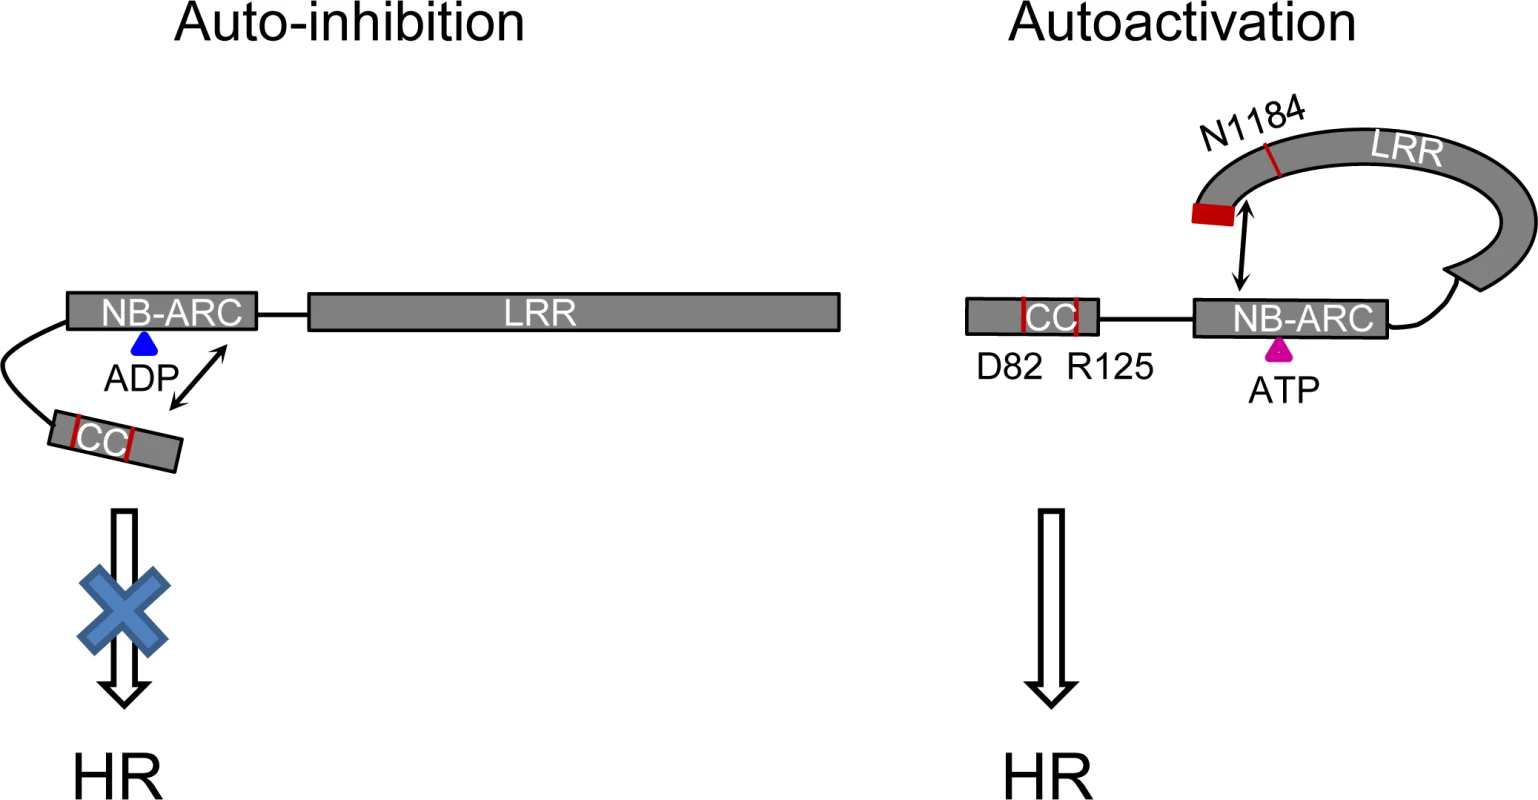 Model of the intra-molecular interactions controlling auto-inhibition or auto-activation in Rp1 proteins.